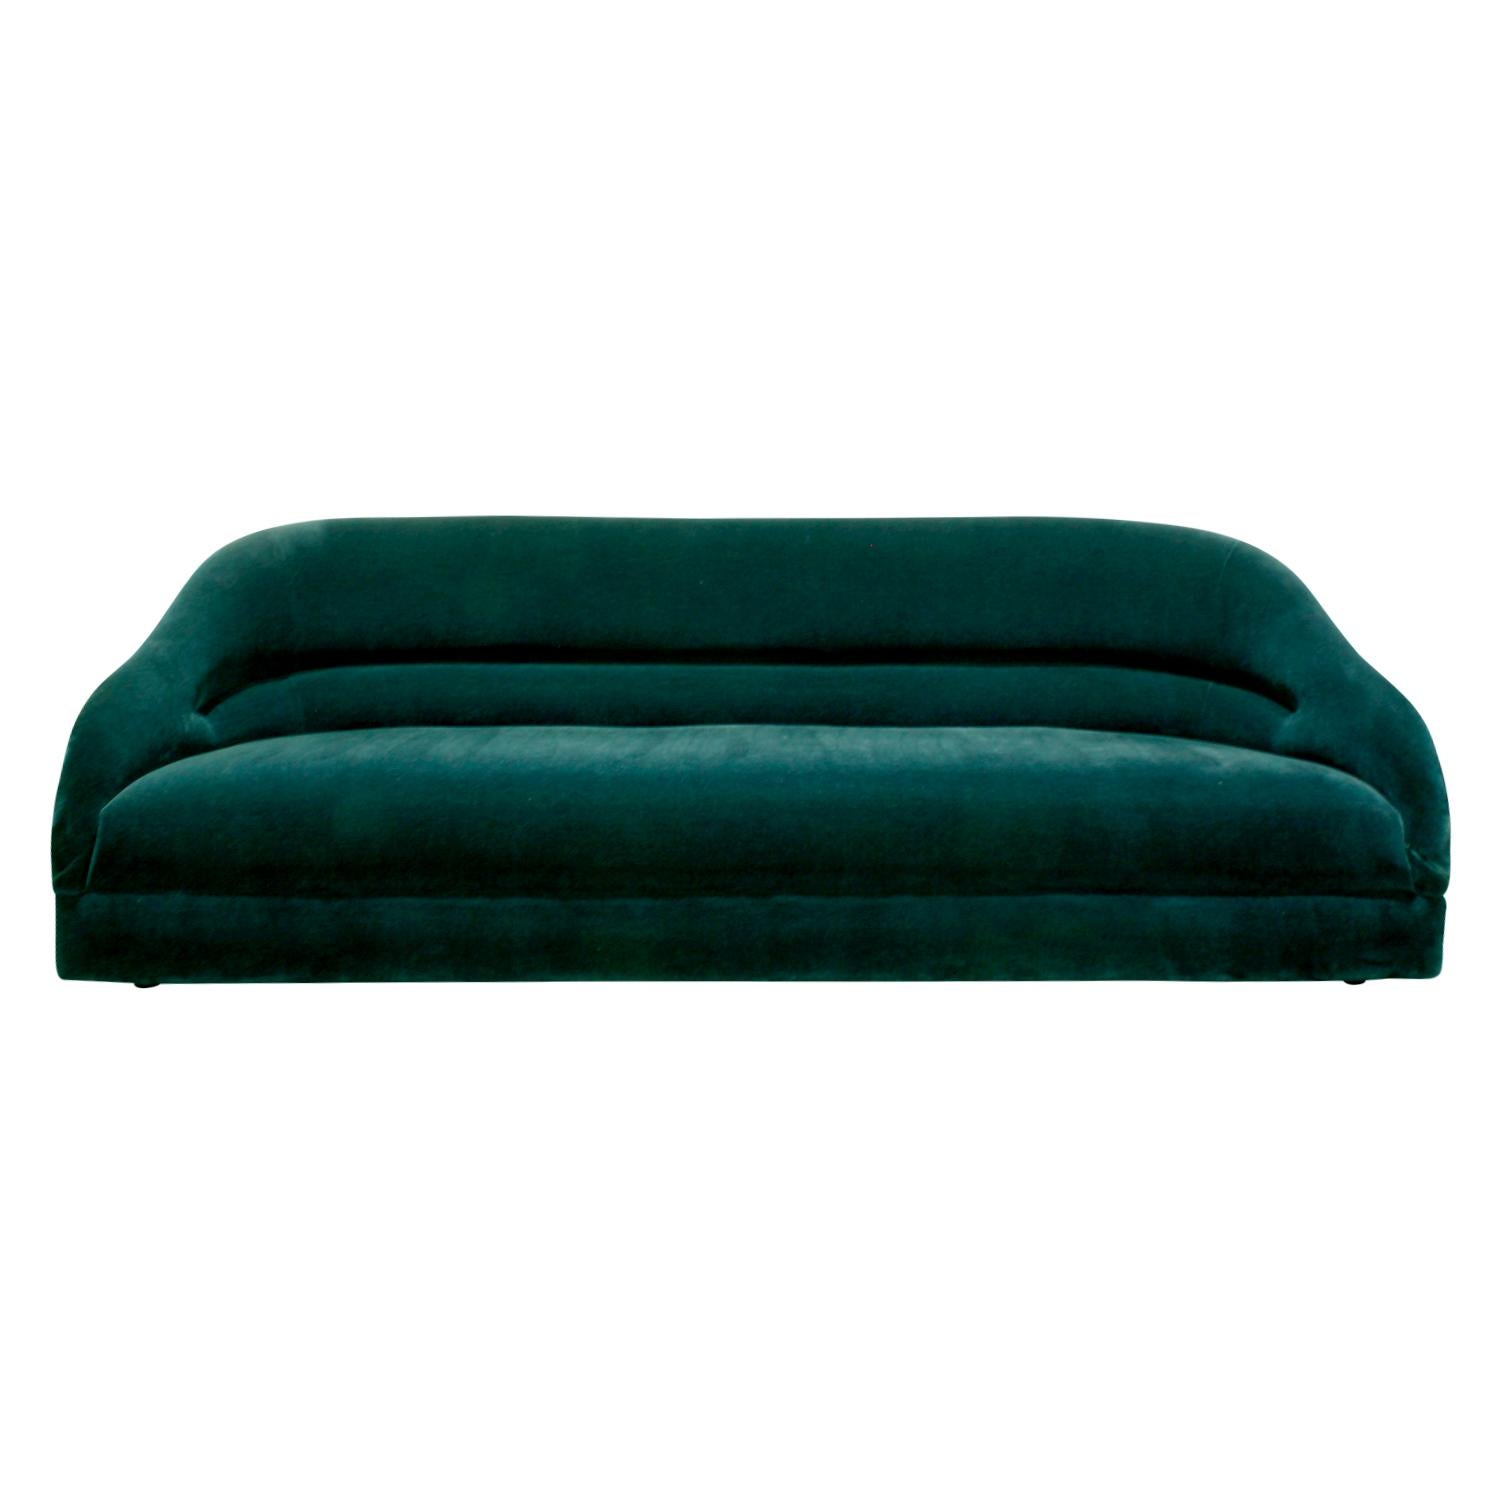 Elegant sofa model no. 2092 with back pleat upholstered in green velvet by Ward Bennett for Brickel Associates, American, 1970s. This is a very chic sofa design.